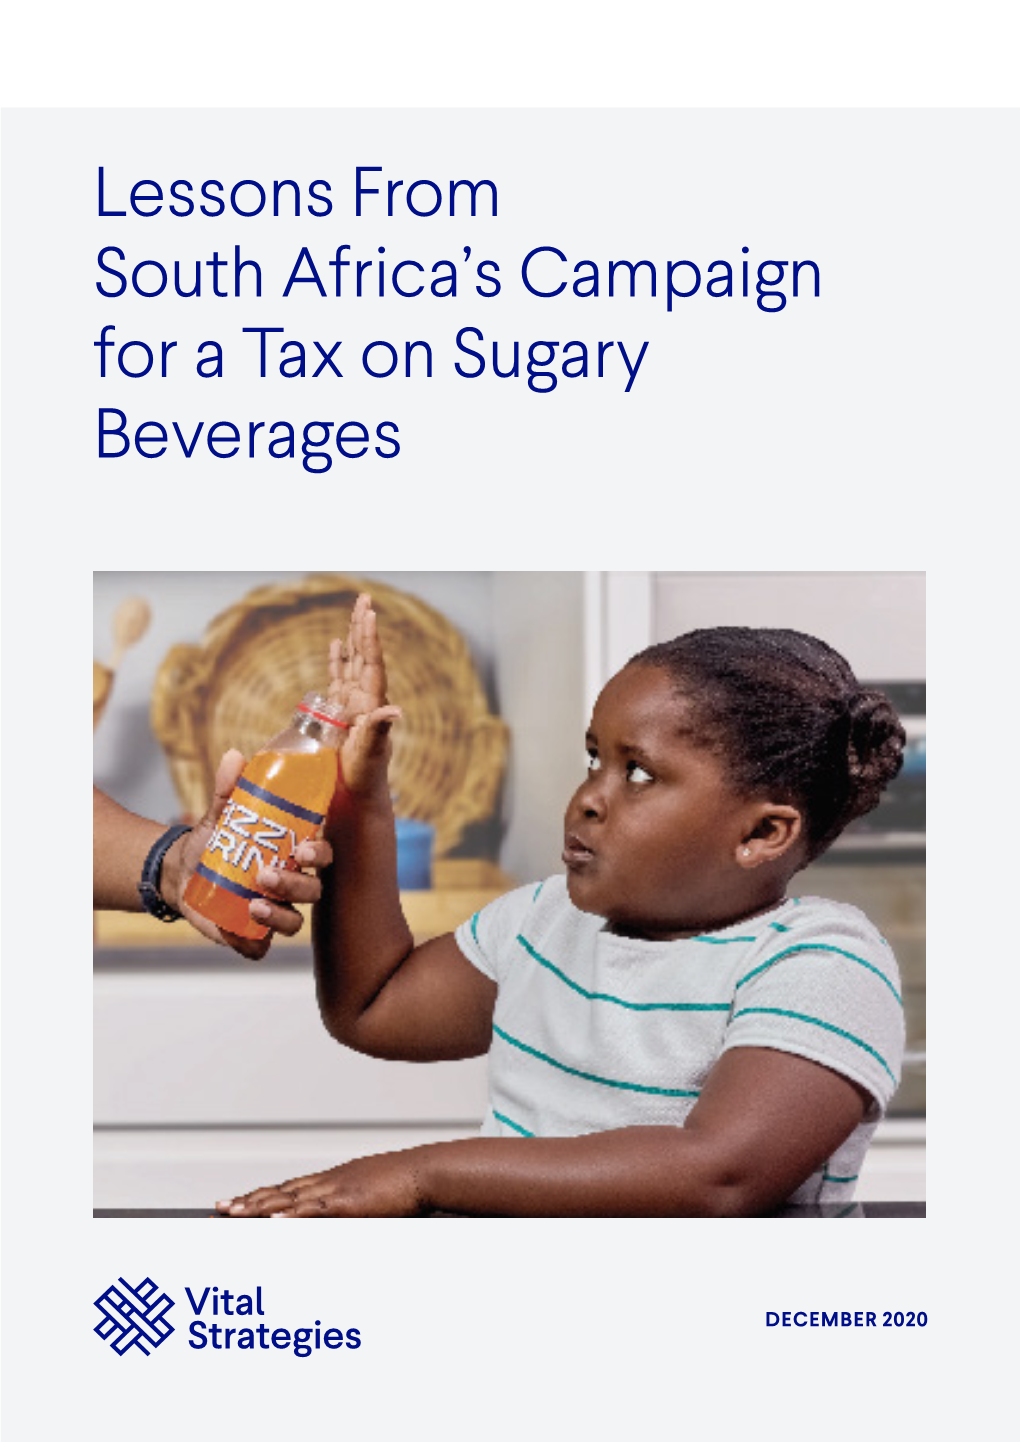 Lessons from South Africa's Campaign for a Tax on Sugary